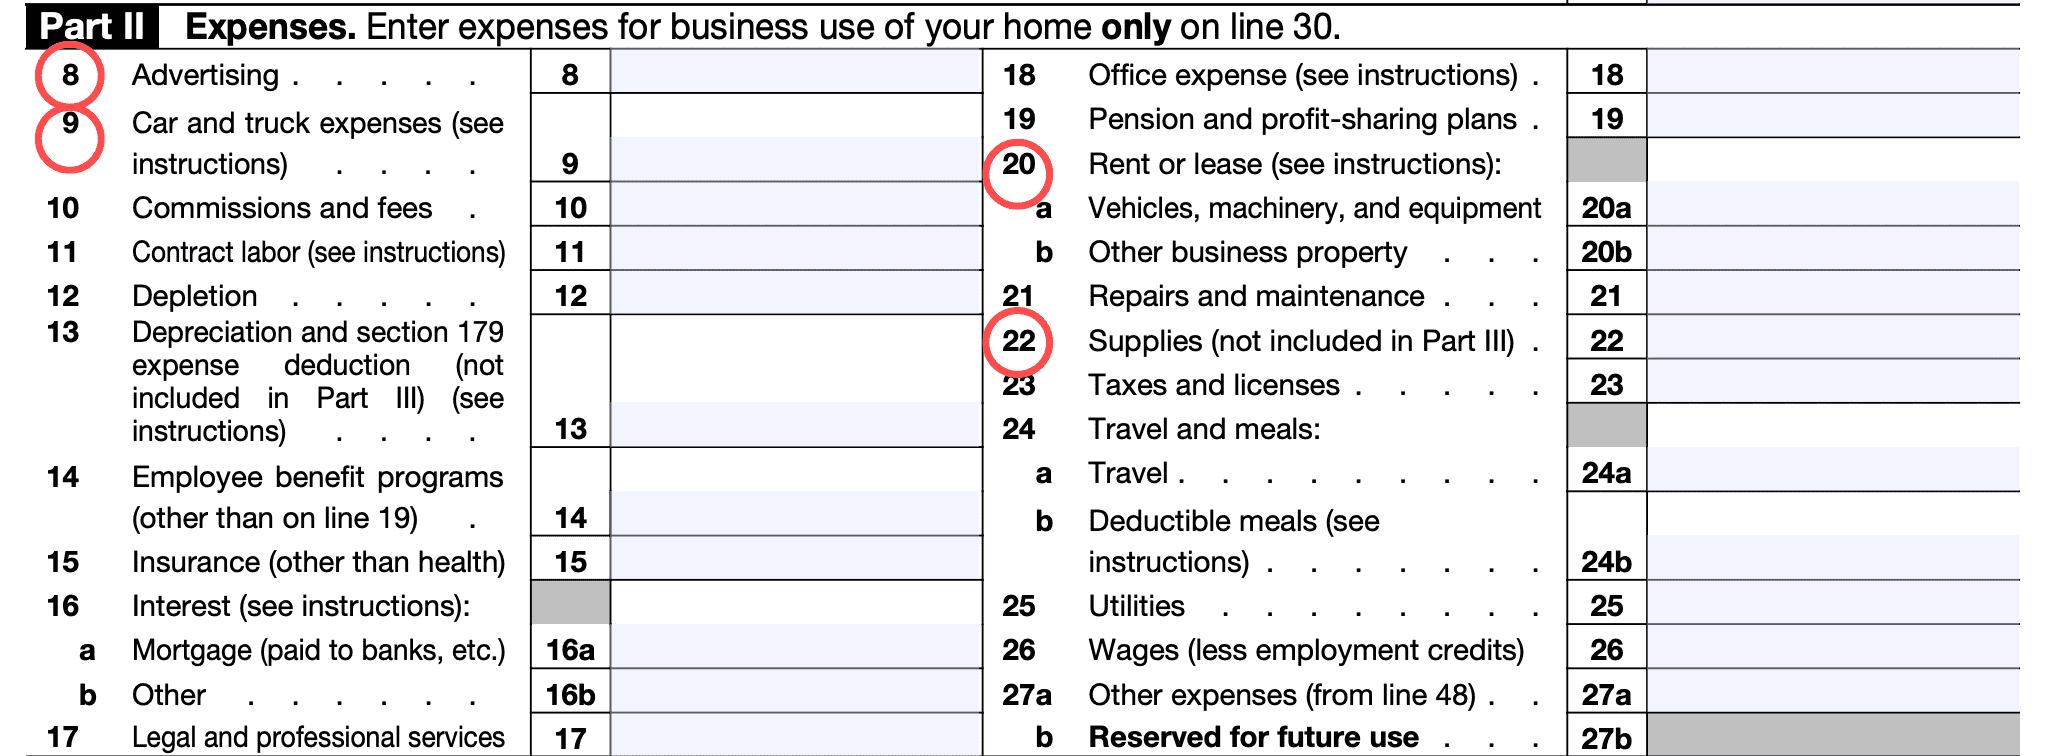 Image displaying a list of expenses for business use of home, including advertising, car expenses, legal services, rent, travel, and taxes. Useful for self-employed, 1099, and freelance workers filing taxes.